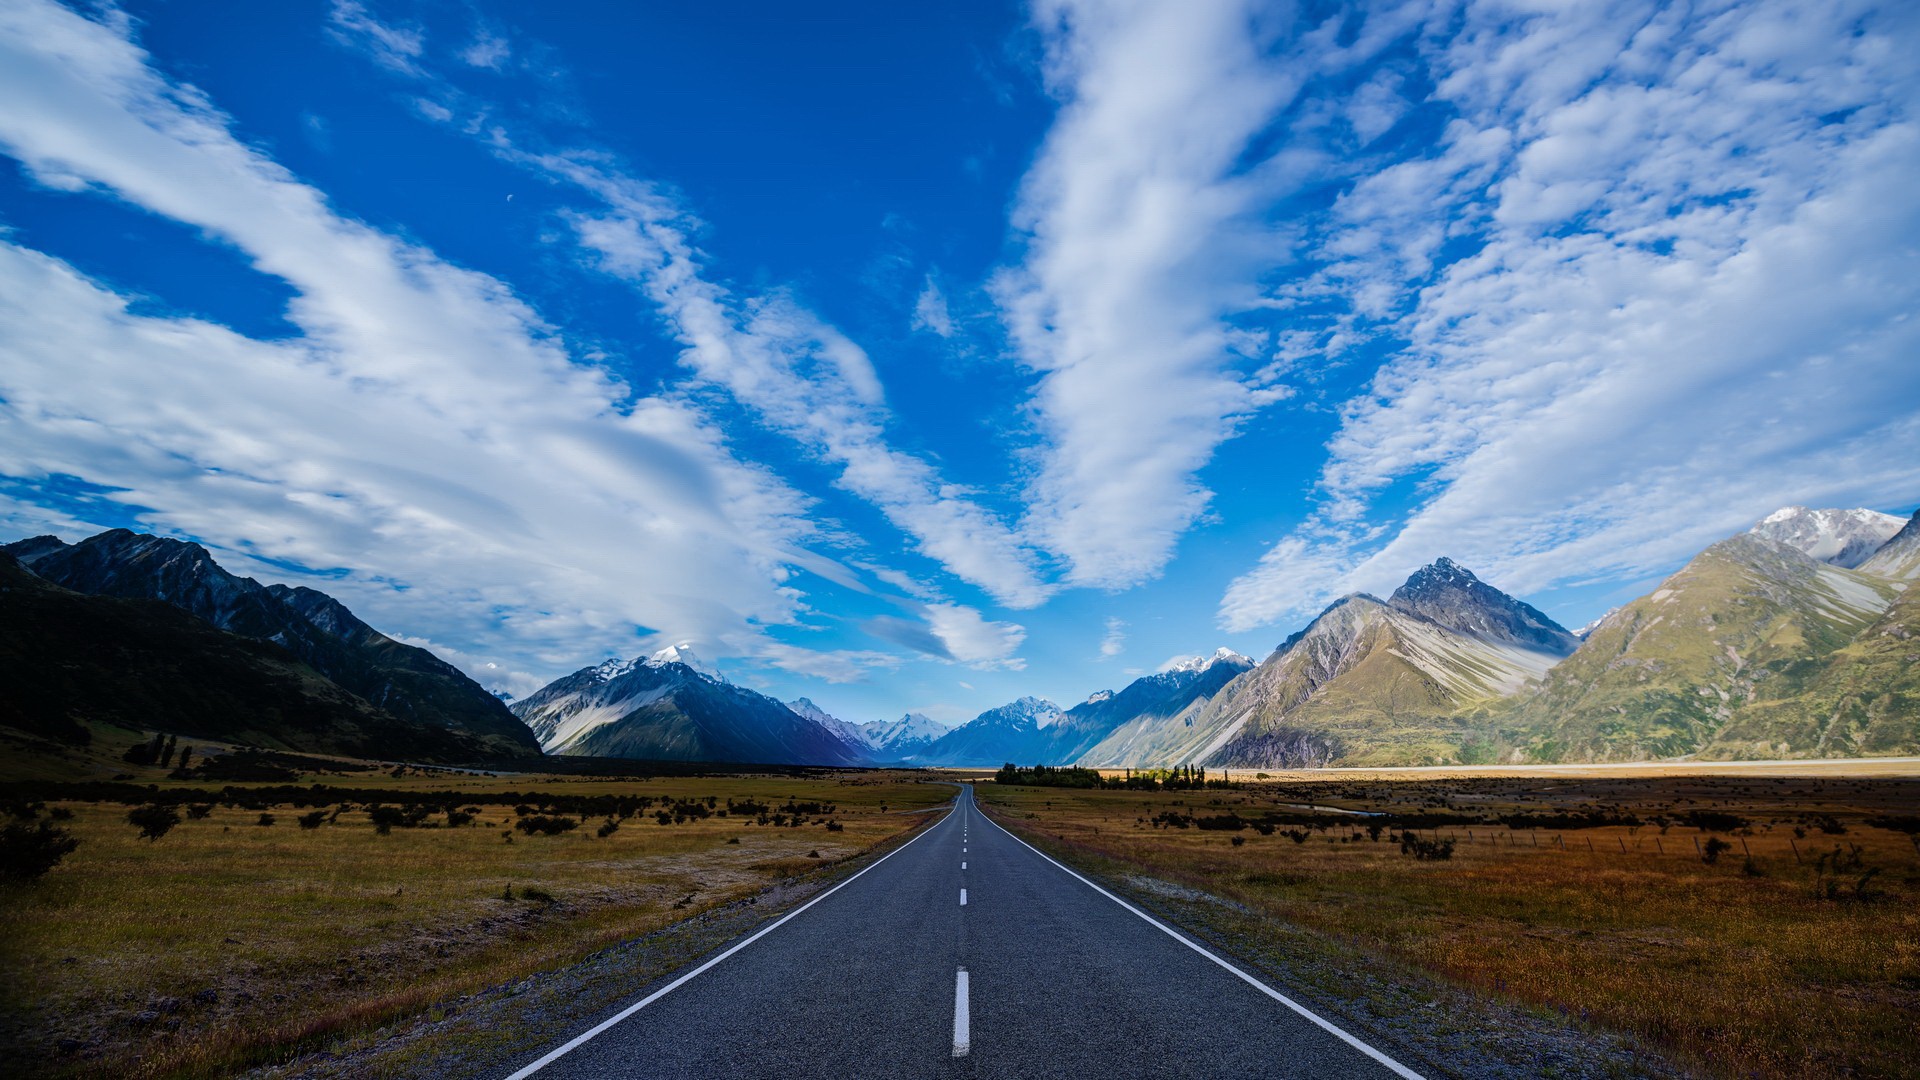 General 1920x1080 landscape nature mountains valley long road New Zealand